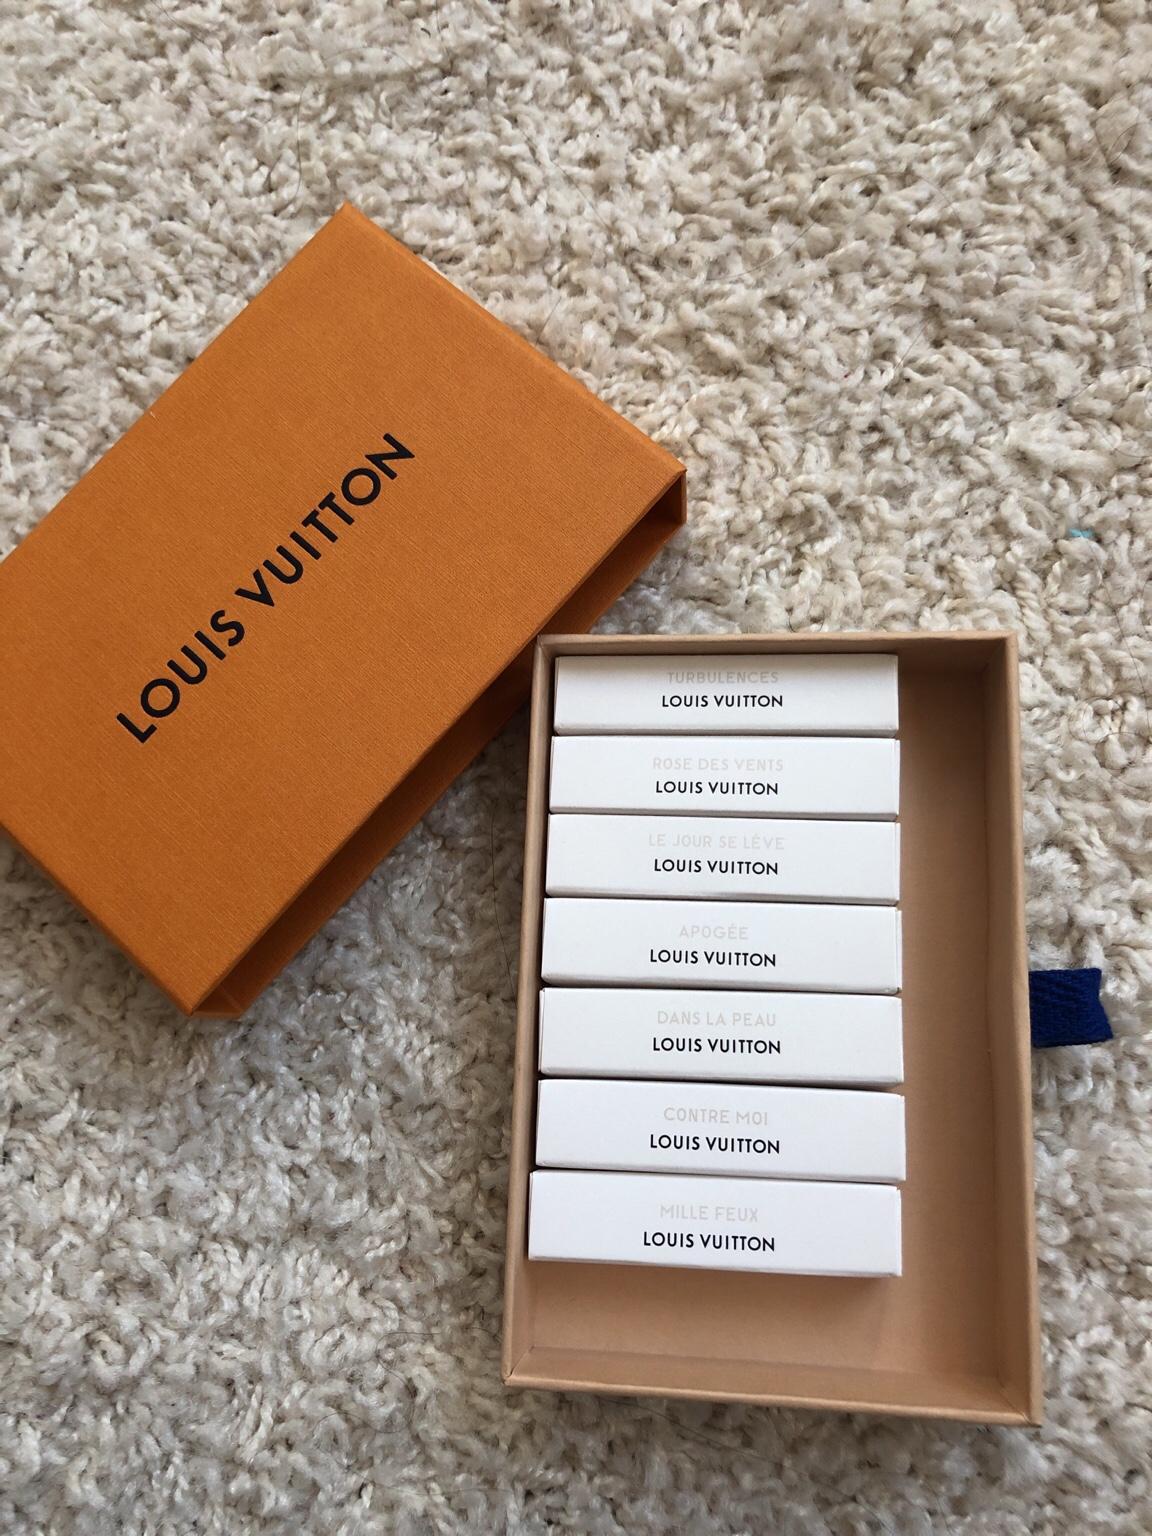 Louis Vuitton perfume samples, new unopened. in W13 Ealing for £45.00 for  sale